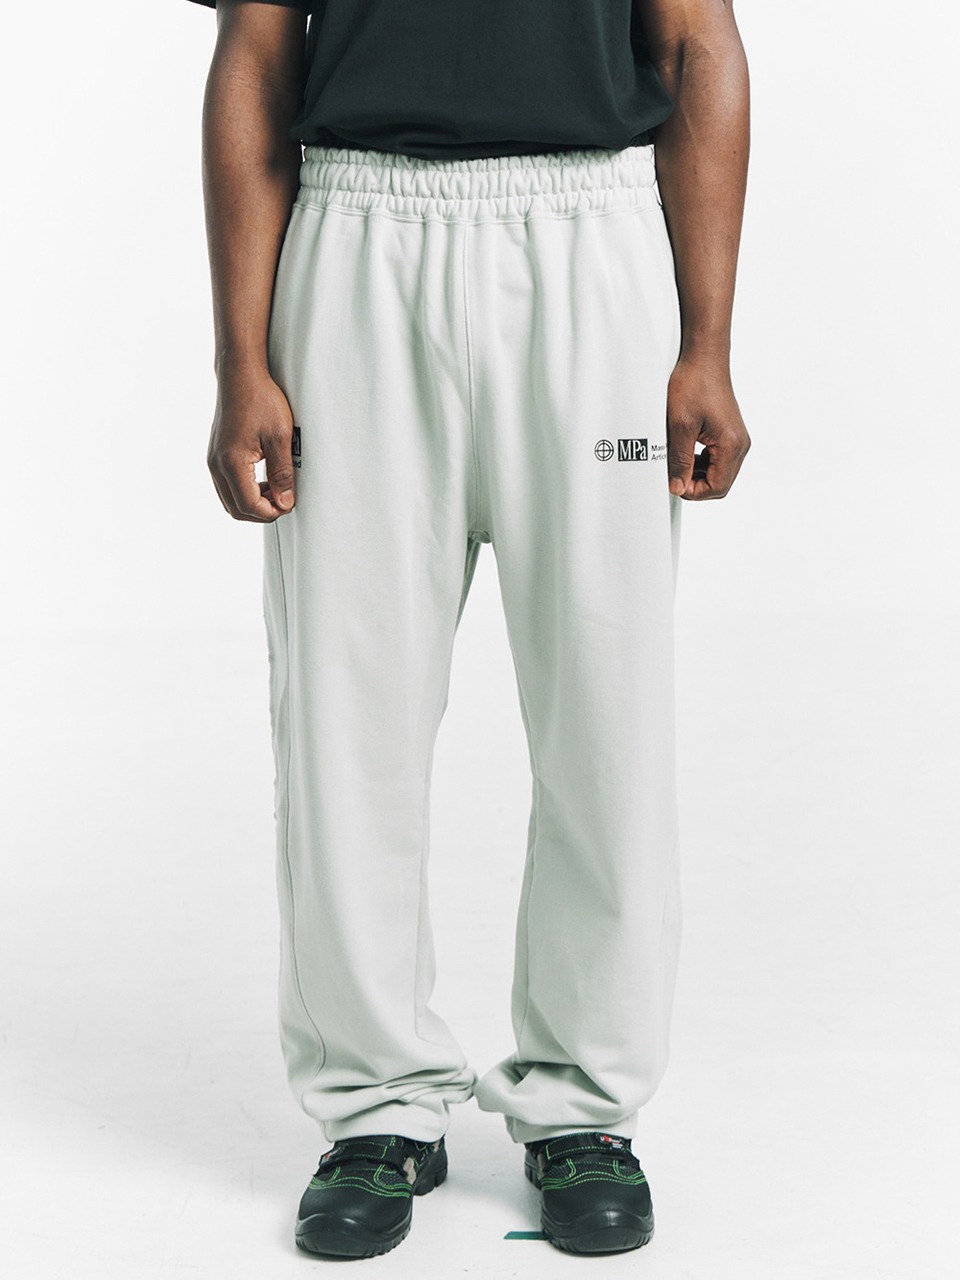 PLASTICPRODUCT - MPa SWEATPANTS (LIME)